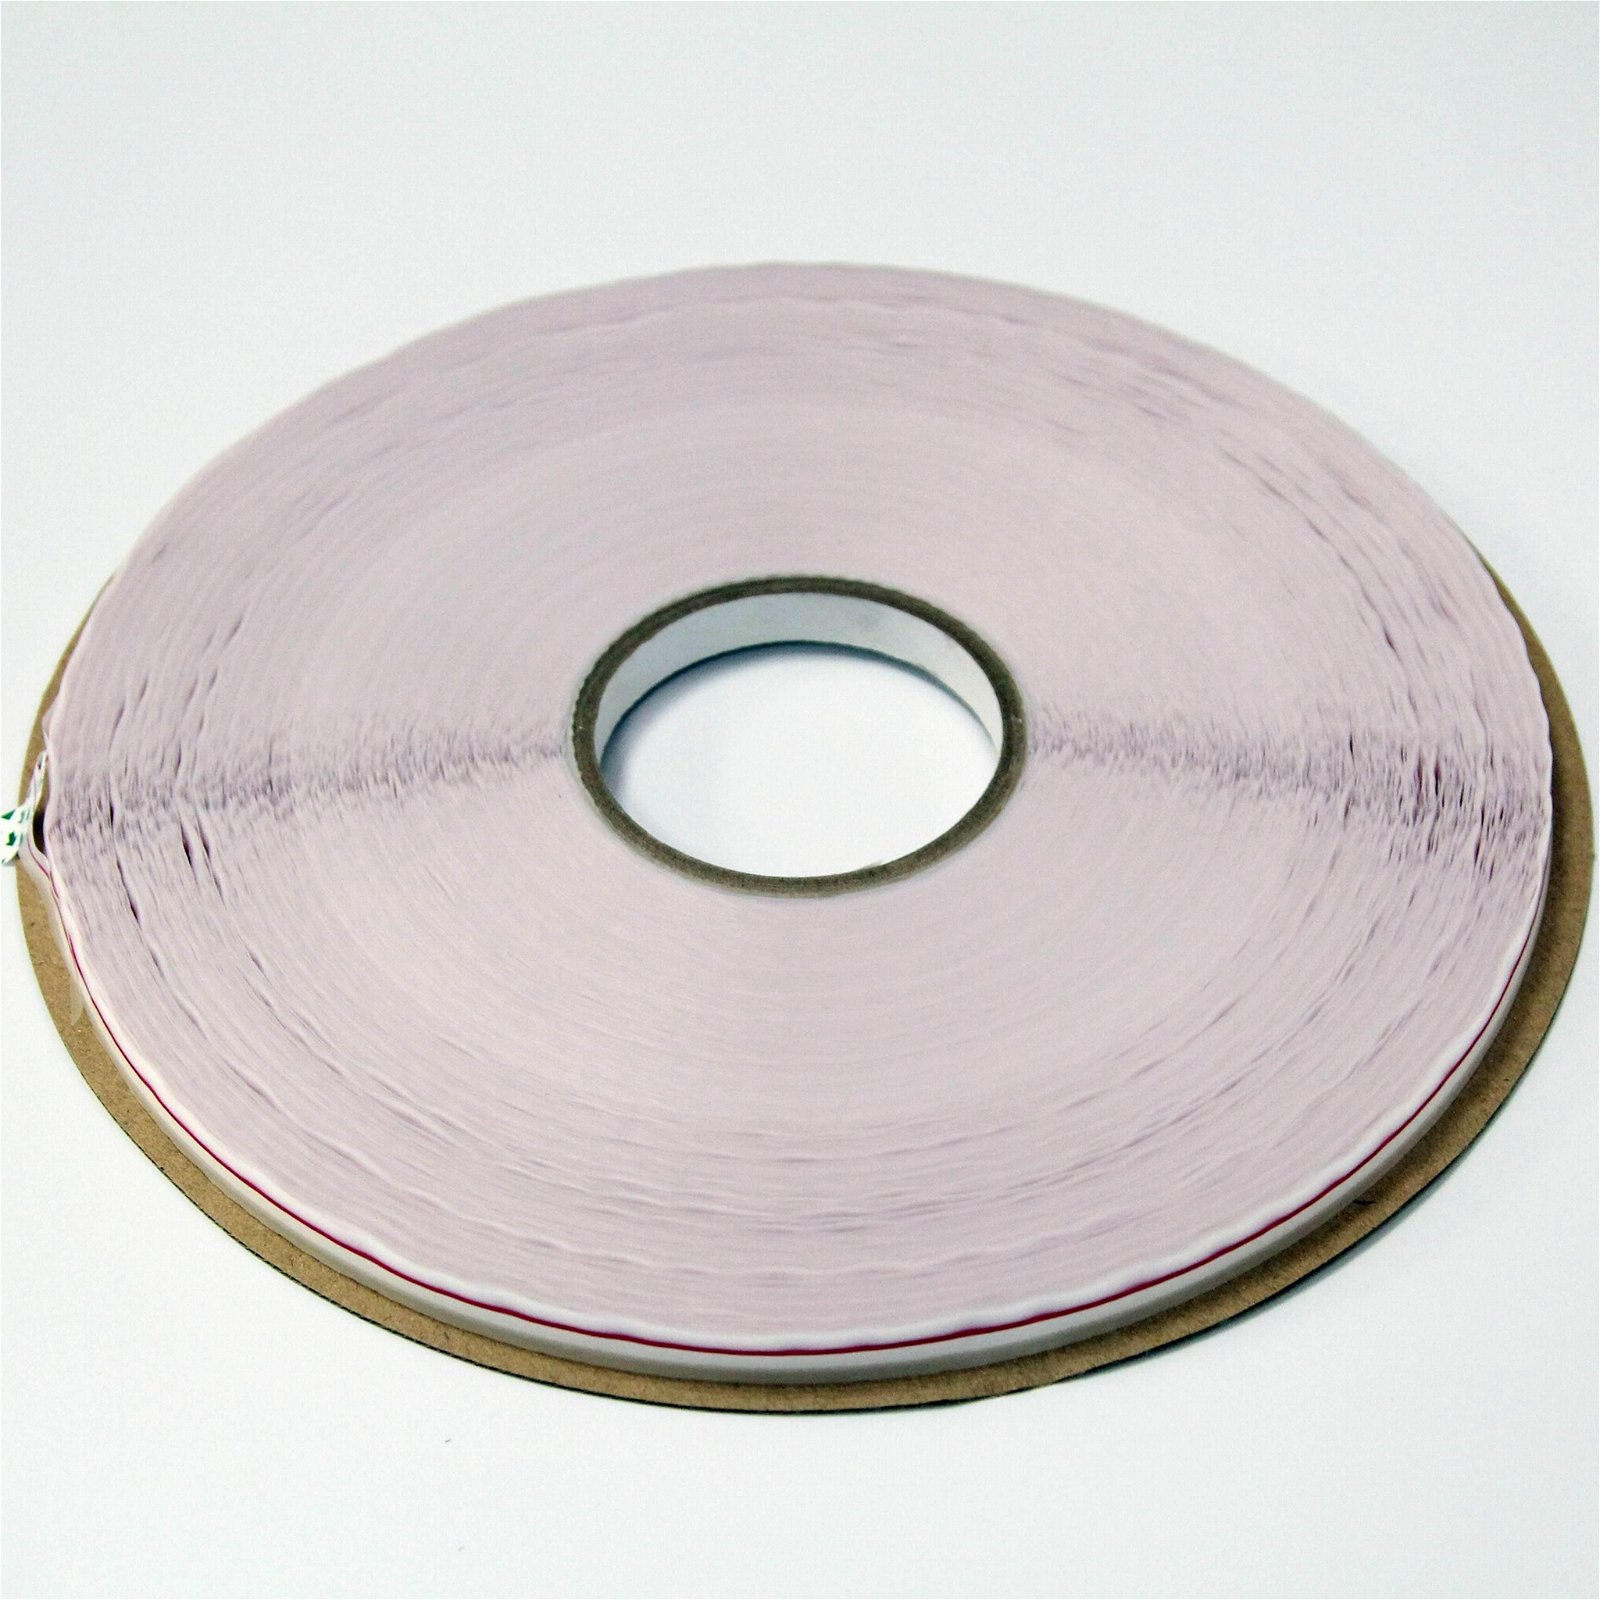 14mm*4/6*1000m Red Liner Resealable Bag Sealing Tape for CPP Polymer Bag 5